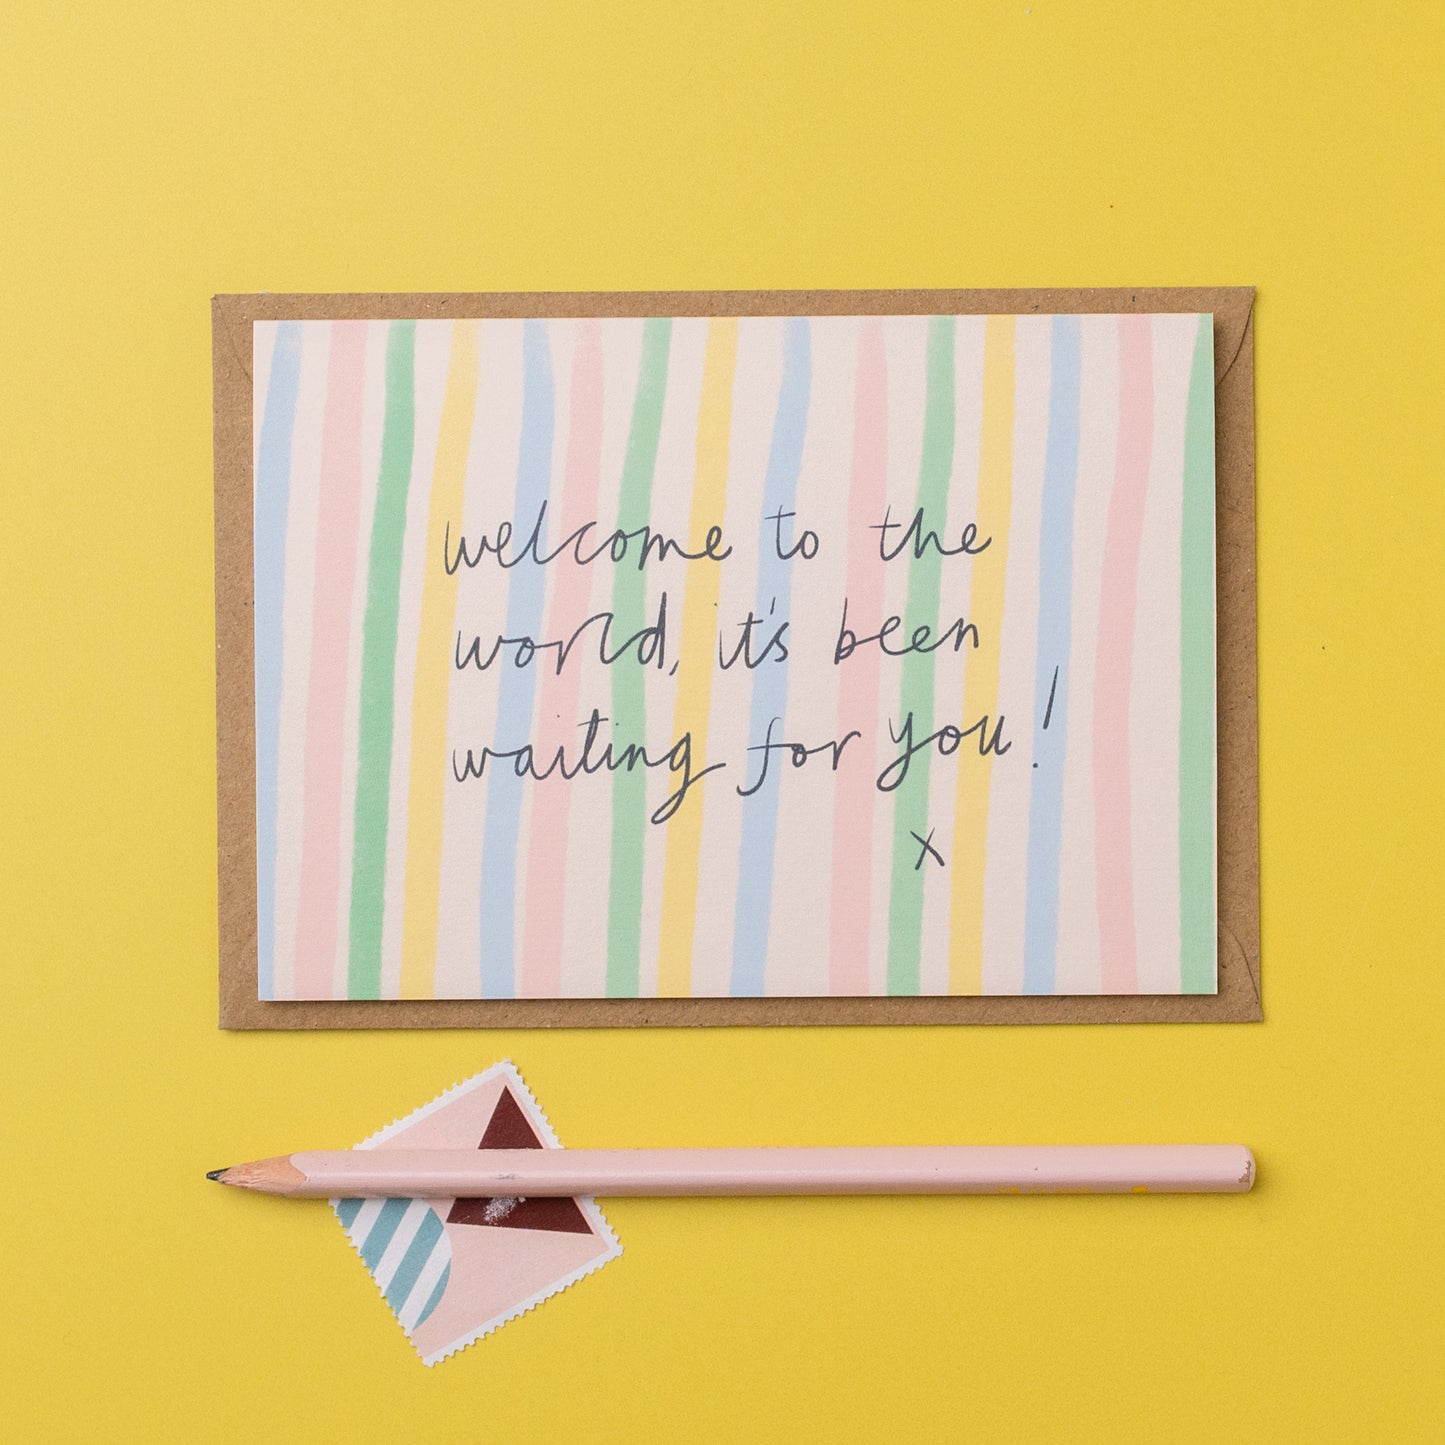 'Welcome to the world, it's been waiting for you' new baby card